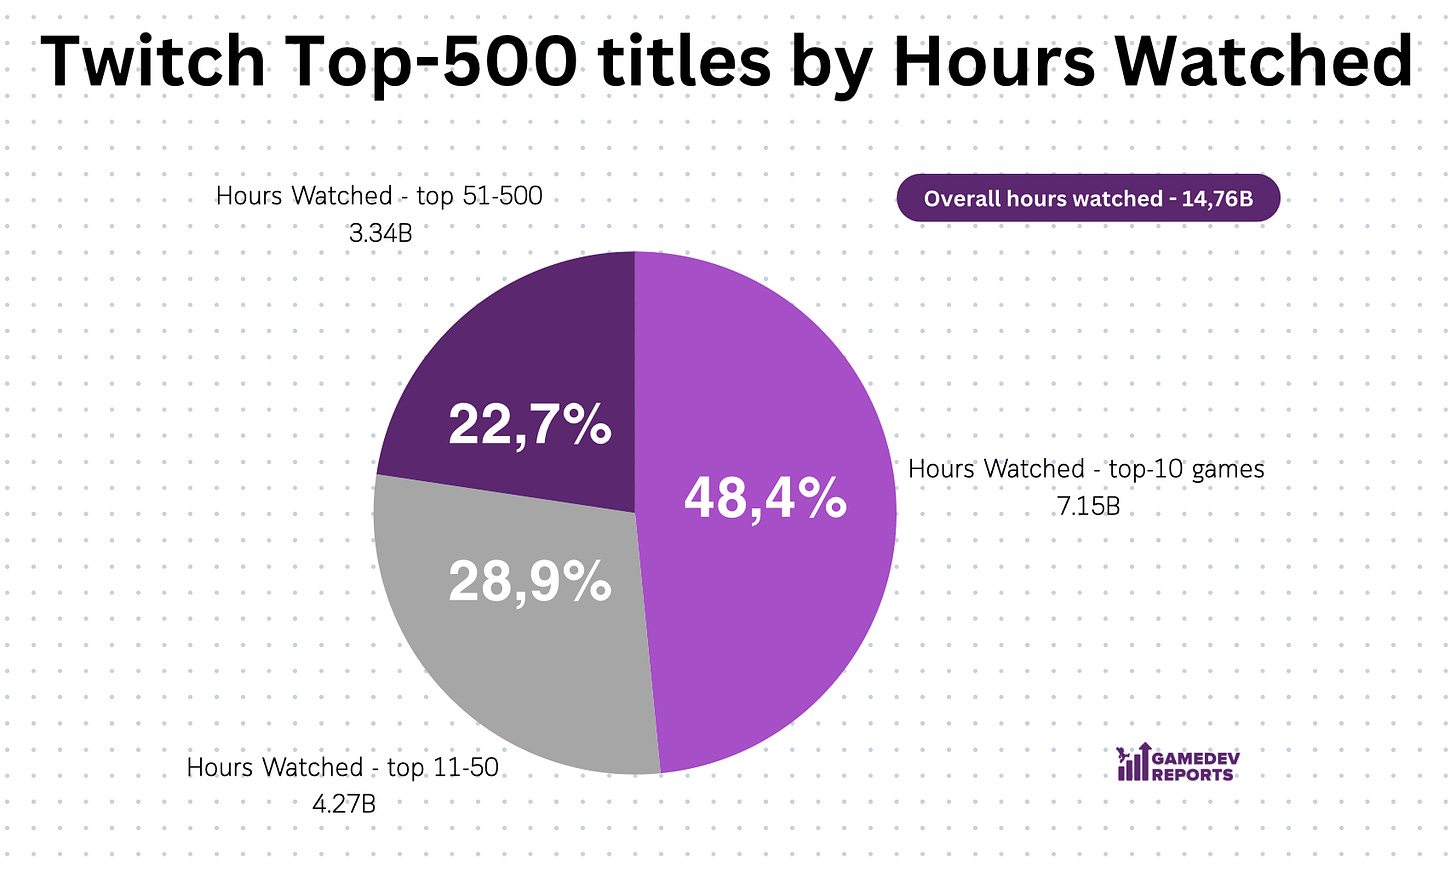 Twitch top 500 titles by hours watched